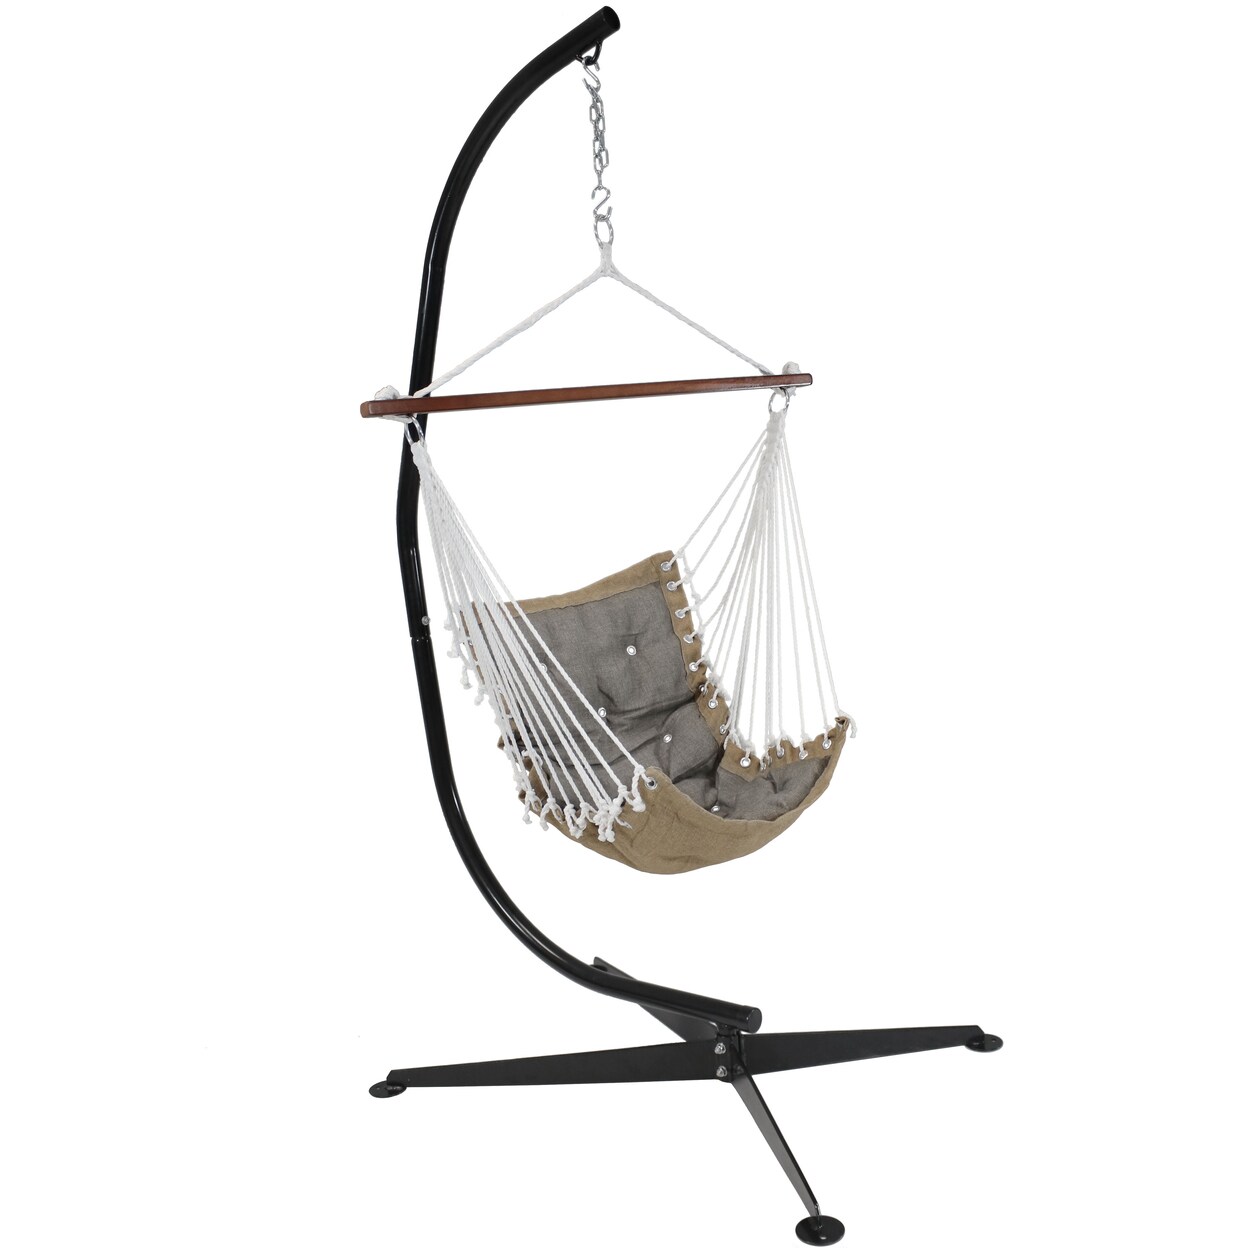 Sunnydaze   Tufted Victorian Hammock Chair with Steel C-Stand - Gray